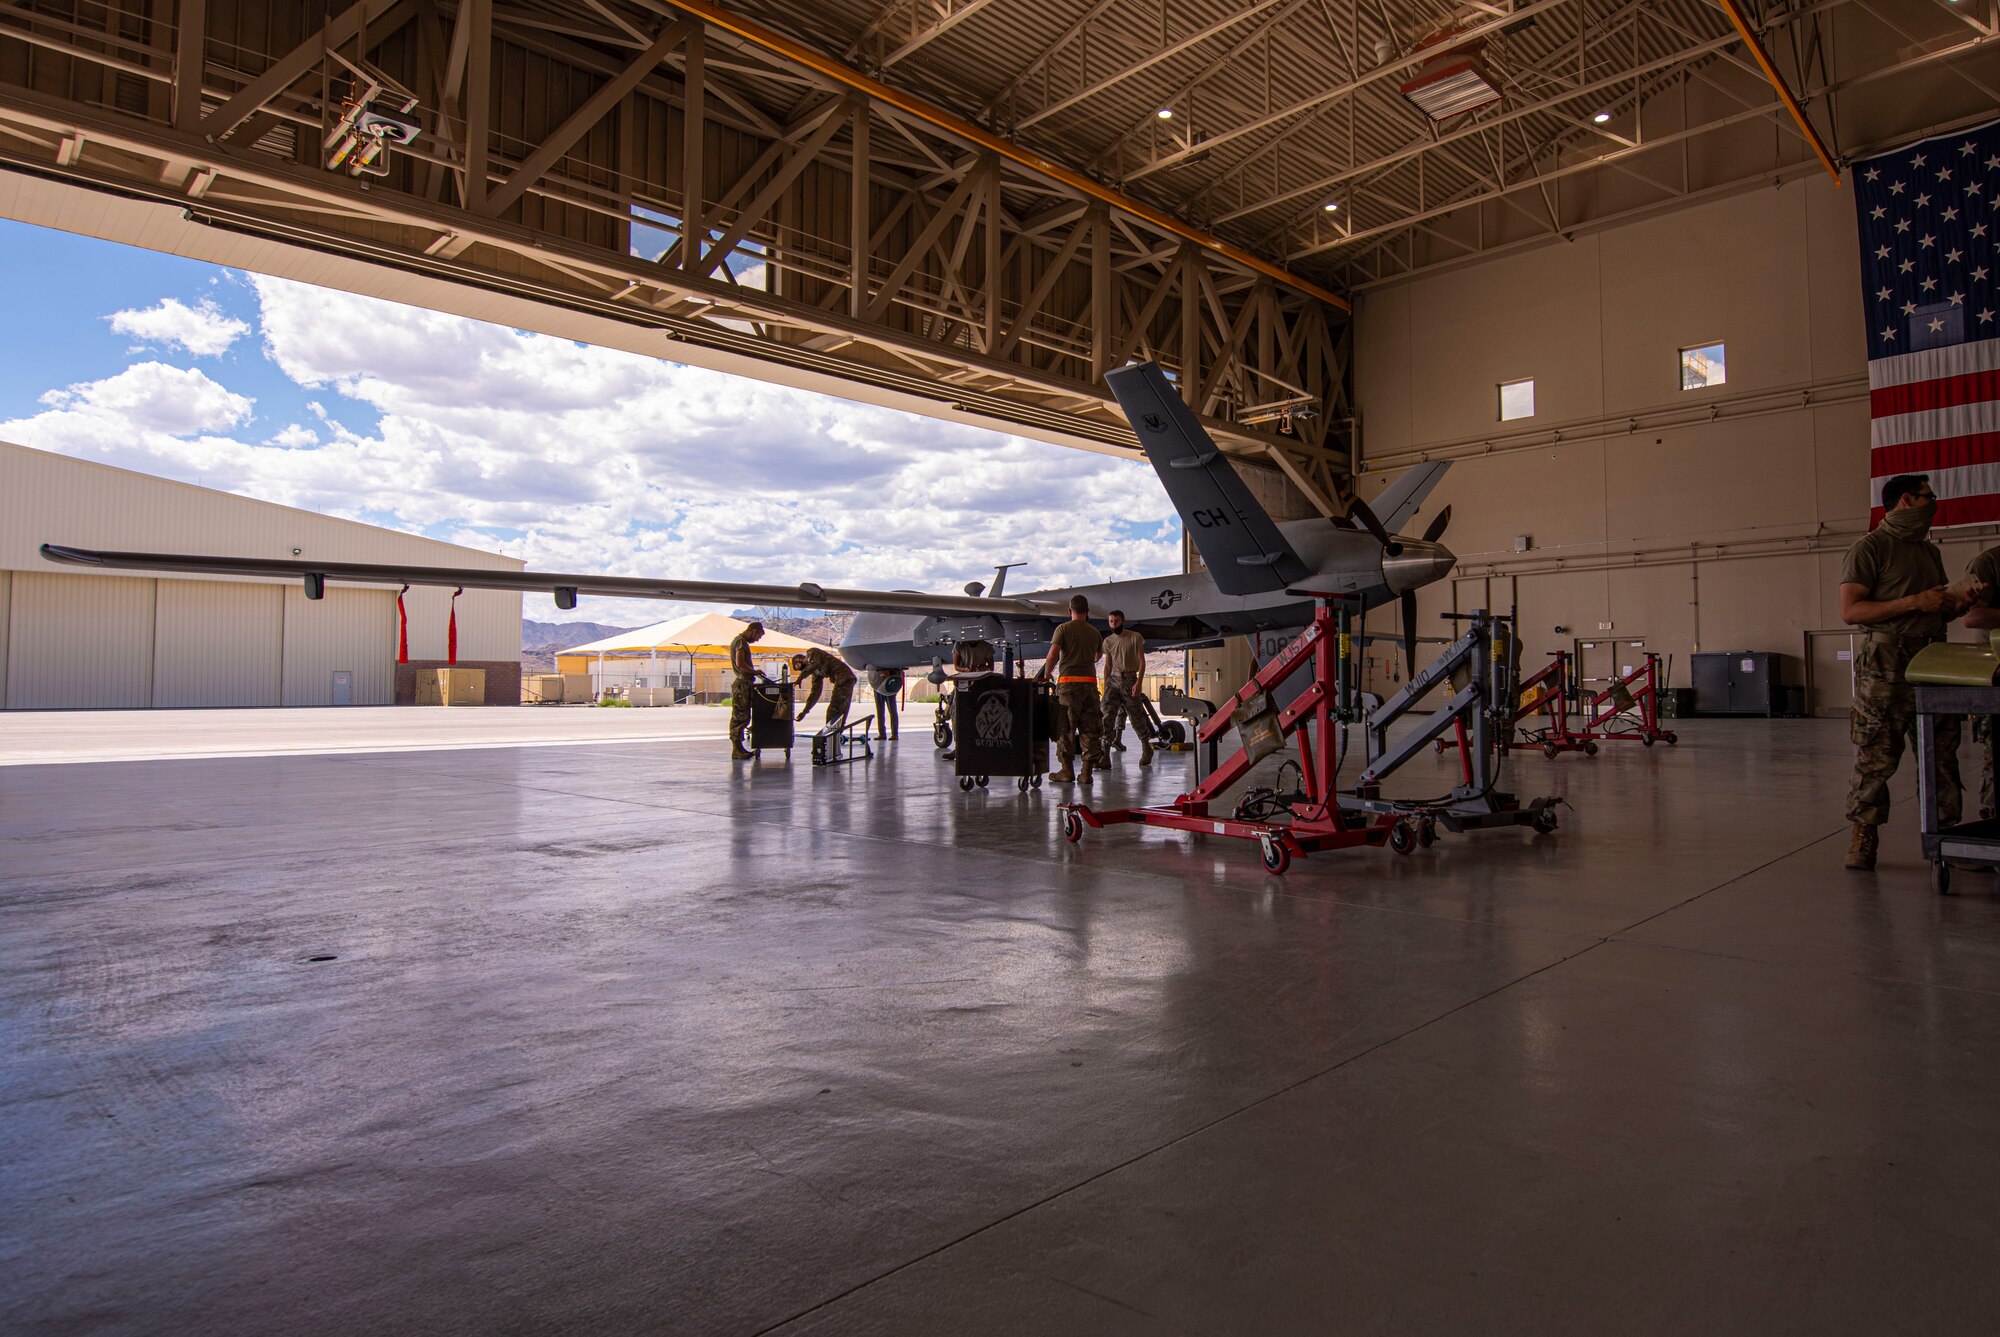 An MQ-9 Reaper sits in a hangar with a crew of 5 members as they prepare for routine maintenance.